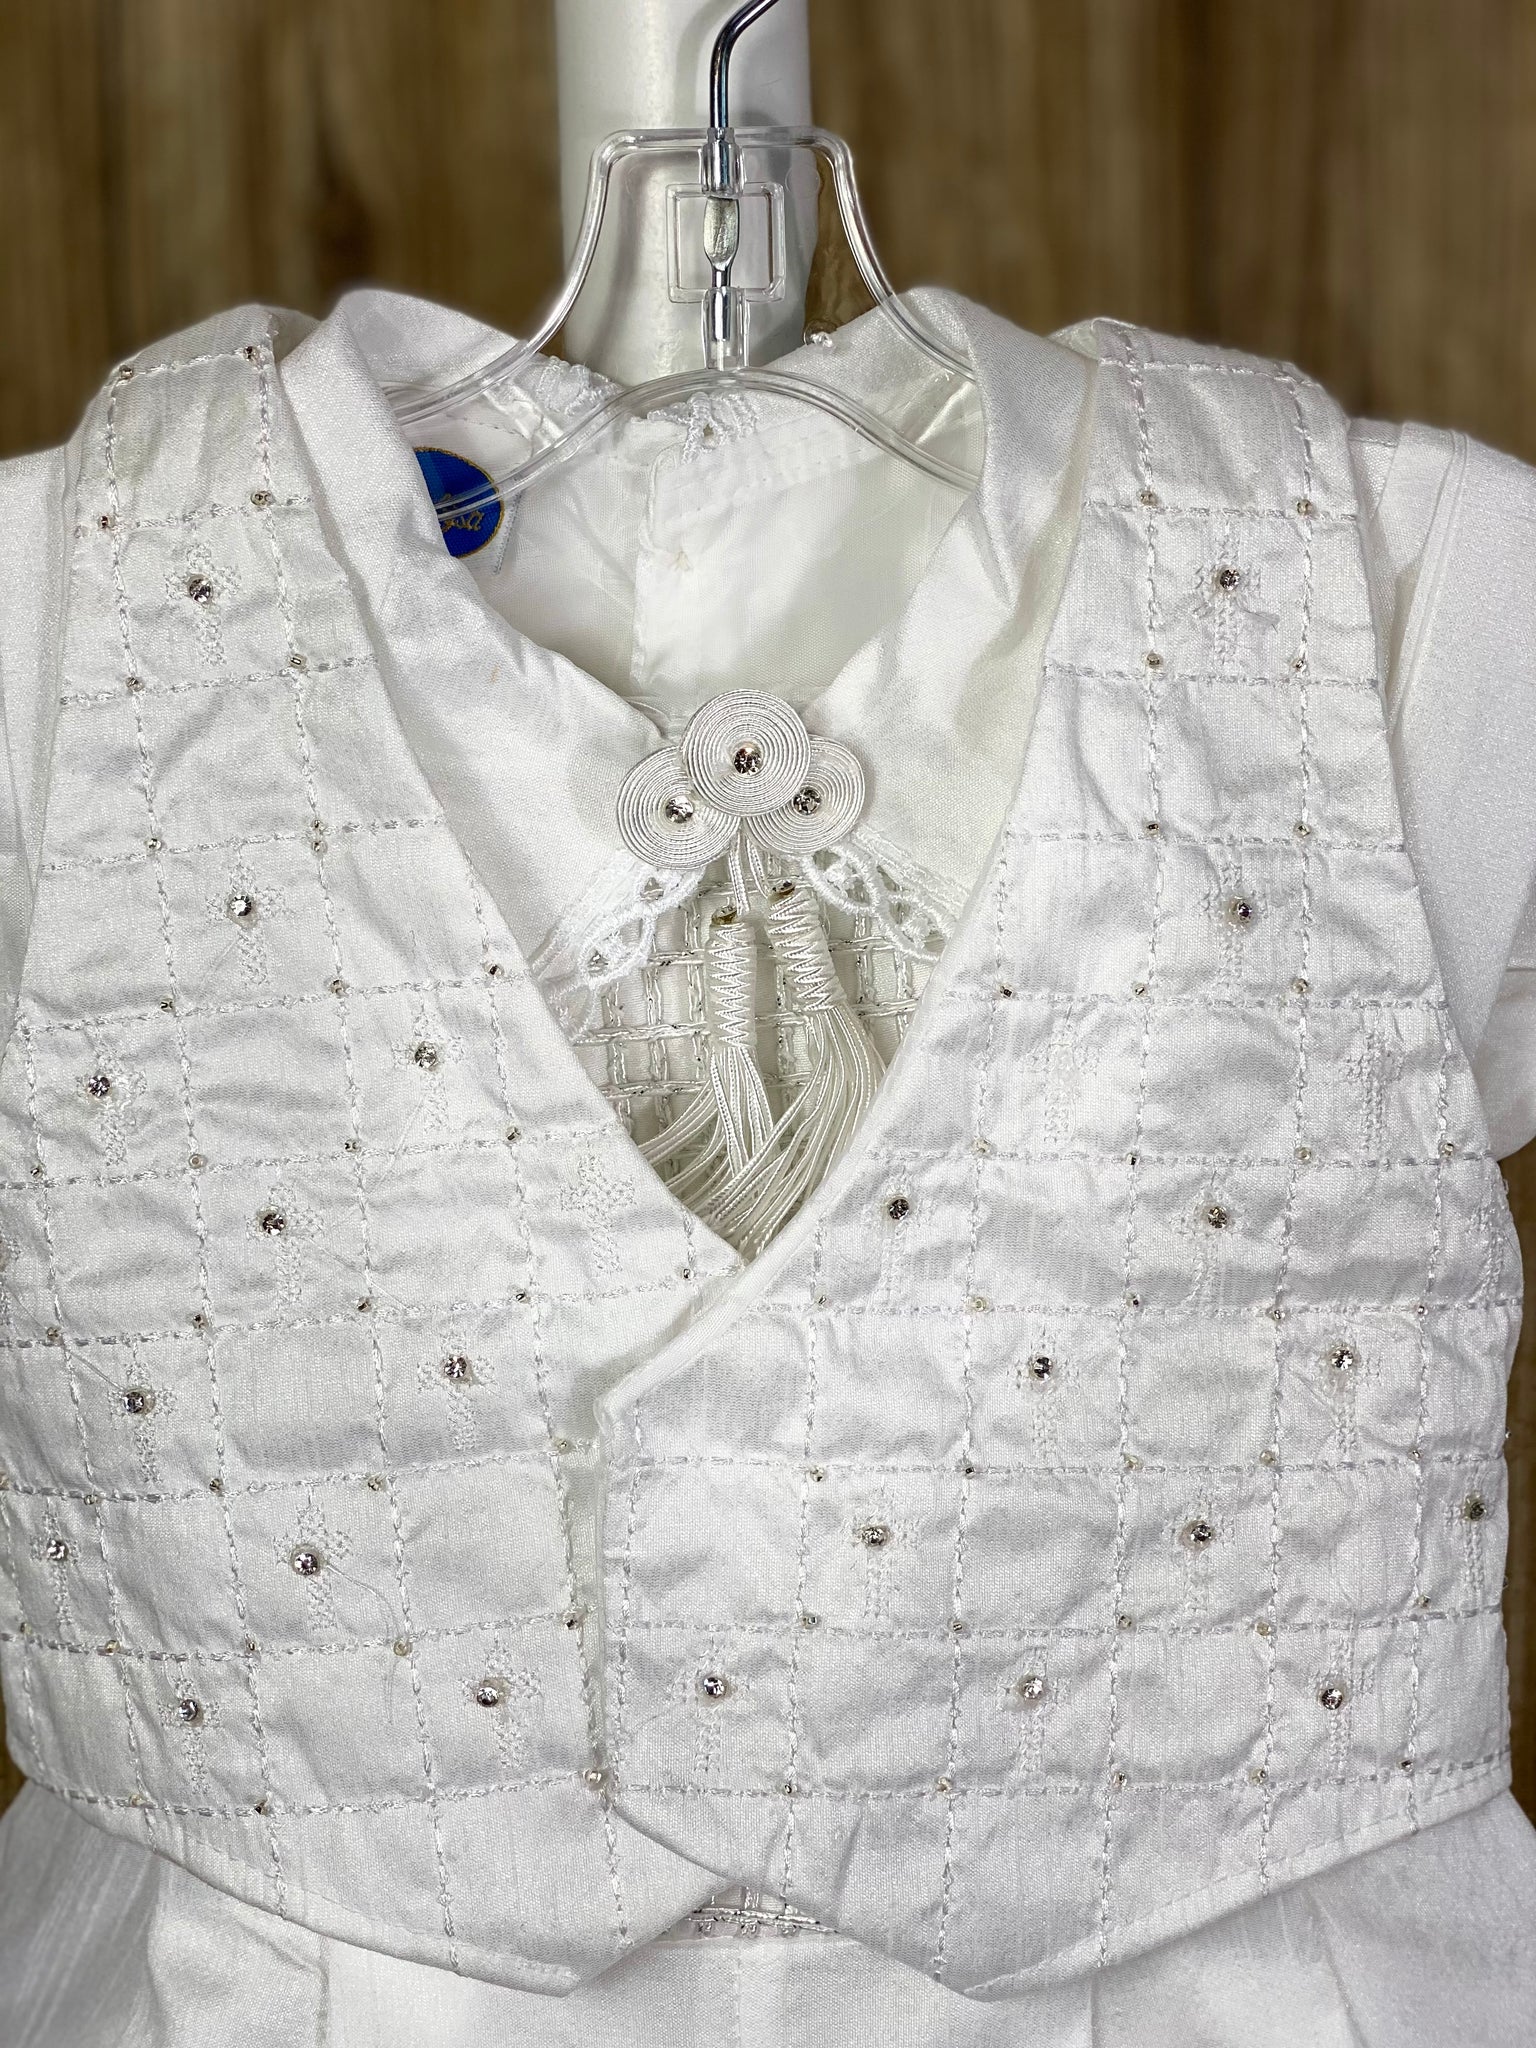 This a beautiful, one-of-a-kind boy’s baptism gown/set.  Lovely clothes for a precious child.  4- piece set including vest, shirt, pants, beret Satin, White pictures shown Grid pattern on vest with embroidered jeweled crosses in checkered pattern Grid pattern on pant legs, cummerbund, shirt bodice, and arm cuffs Intricate trim around cuffs and collar Thin lines around beret trim Tassel pin with 3 rhinestone centered circles